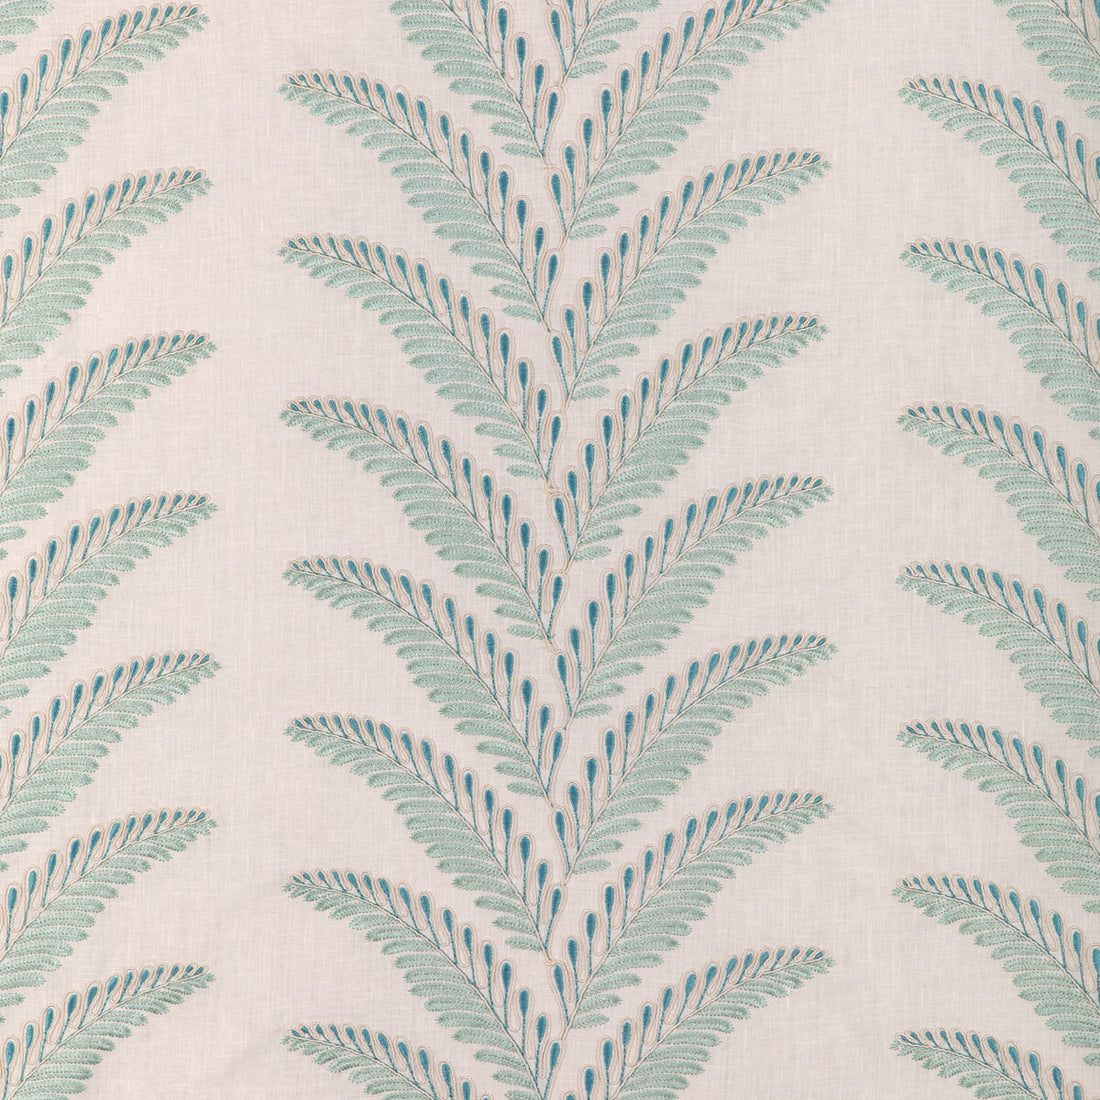 Fougere Emb fabric in aqua color - pattern 8024109.13.0 - by Brunschwig &amp; Fils in the La Menagerie collection